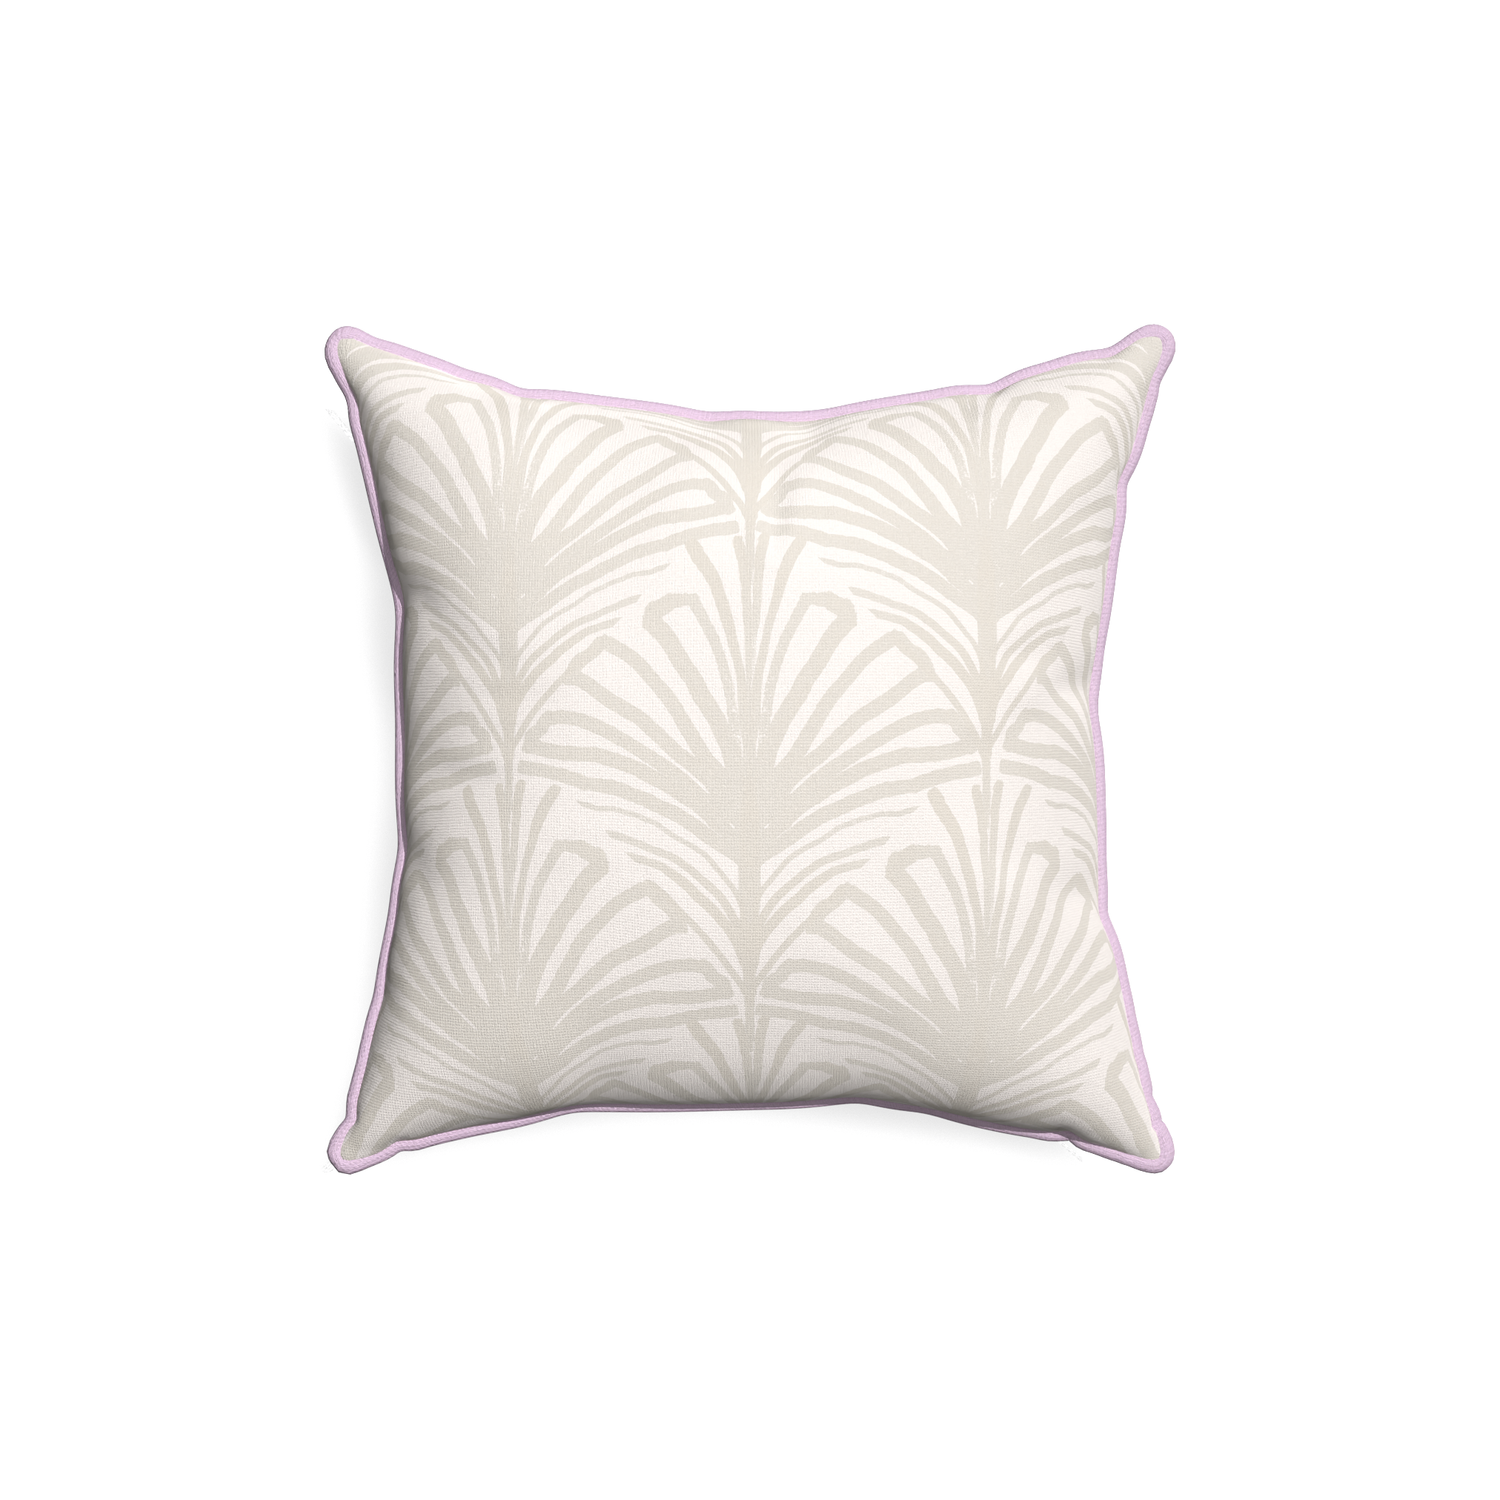 18-square suzy sand custom pillow with l piping on white background